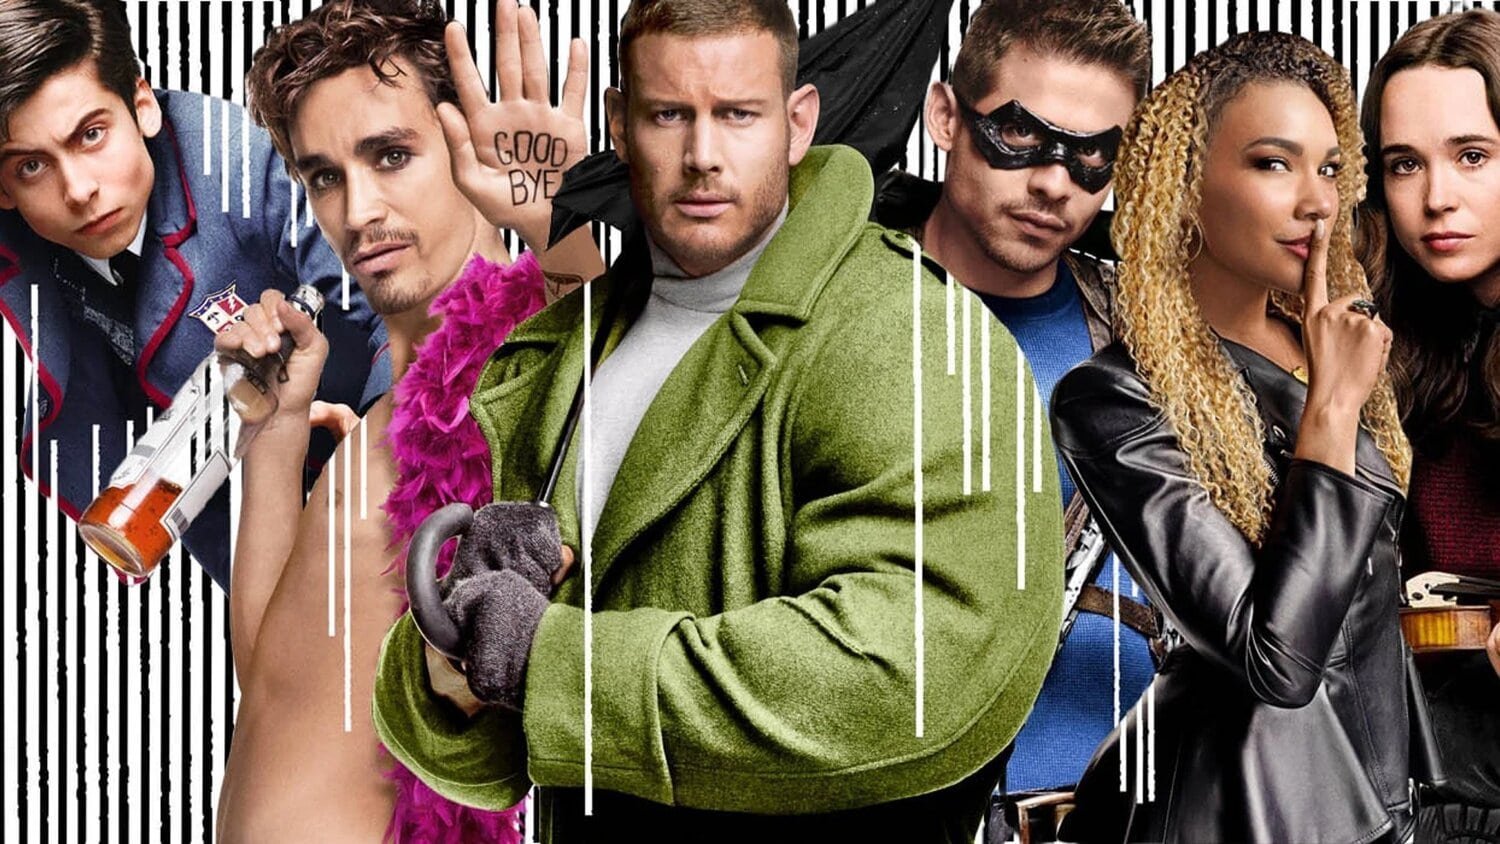 The Umbrella Academy 2 10 Days To Save The World Release Date 